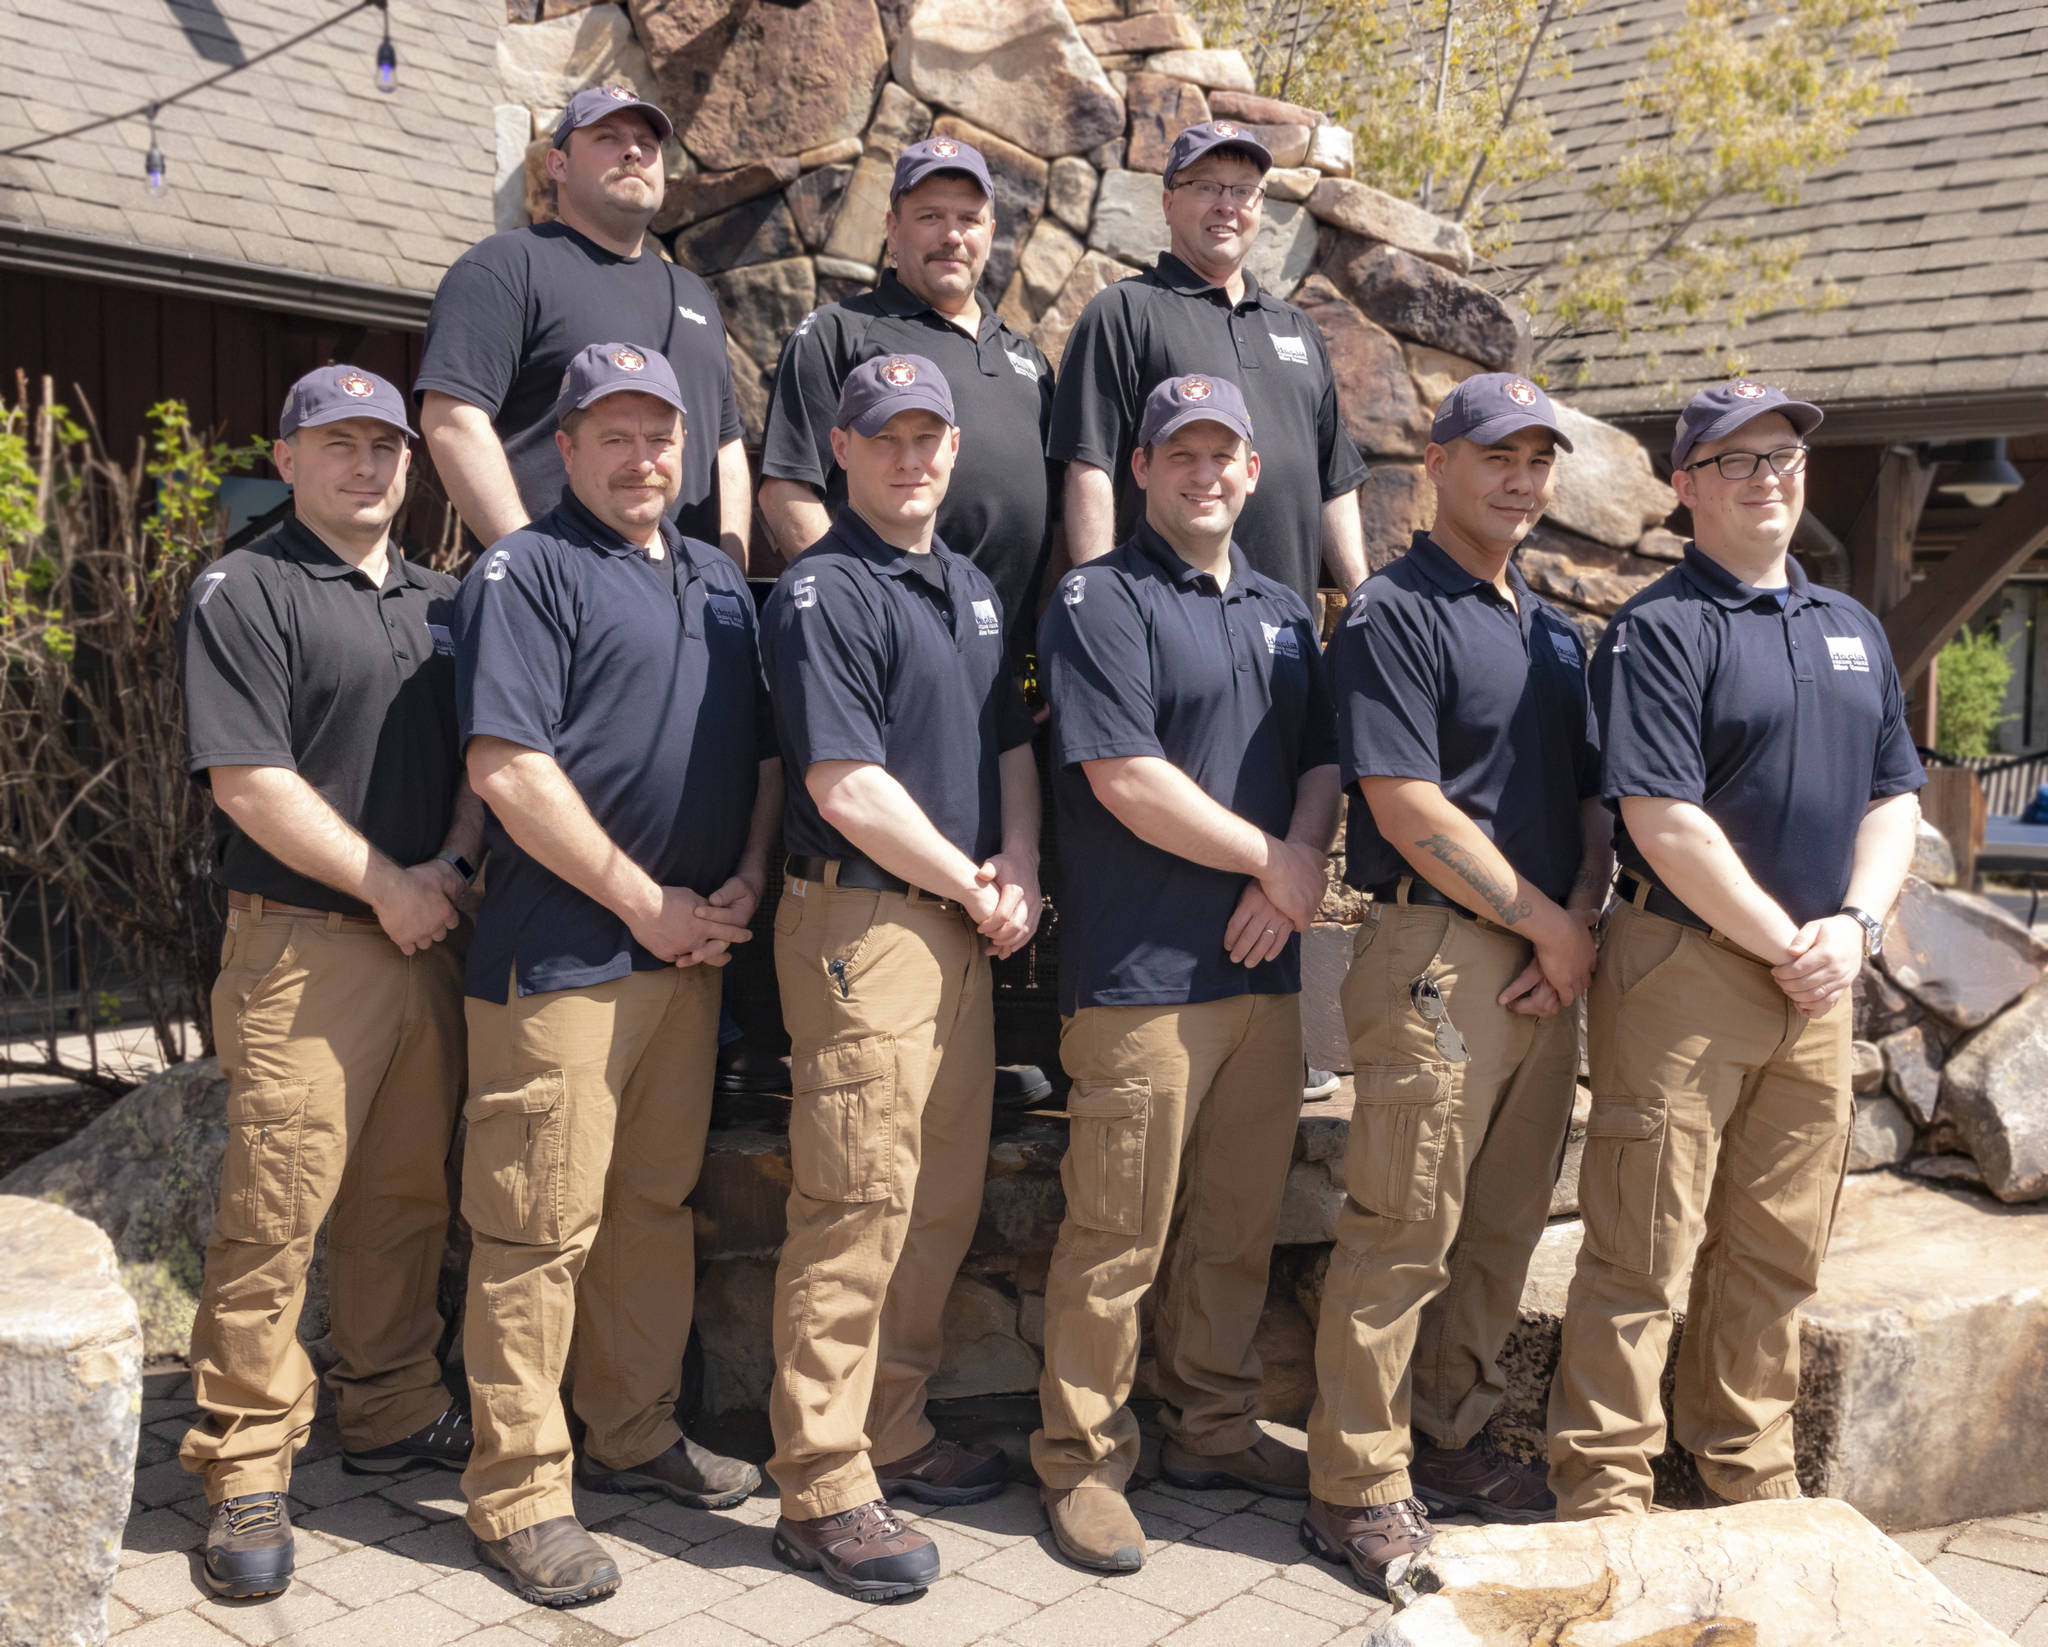 The Hecla-Greens Creek team that participated in the Central Mine Rescue Competition is pictured. The front row, from left, is Dustin McGillvray, J.P. Roulet, Adam Baker, Ryan Friend, Tim Katasse and Chris Gucker. The back row, from left, is Jeff Trego, John Howard and Al Morrison. (Courtesy photo | Greens Creek Mine)